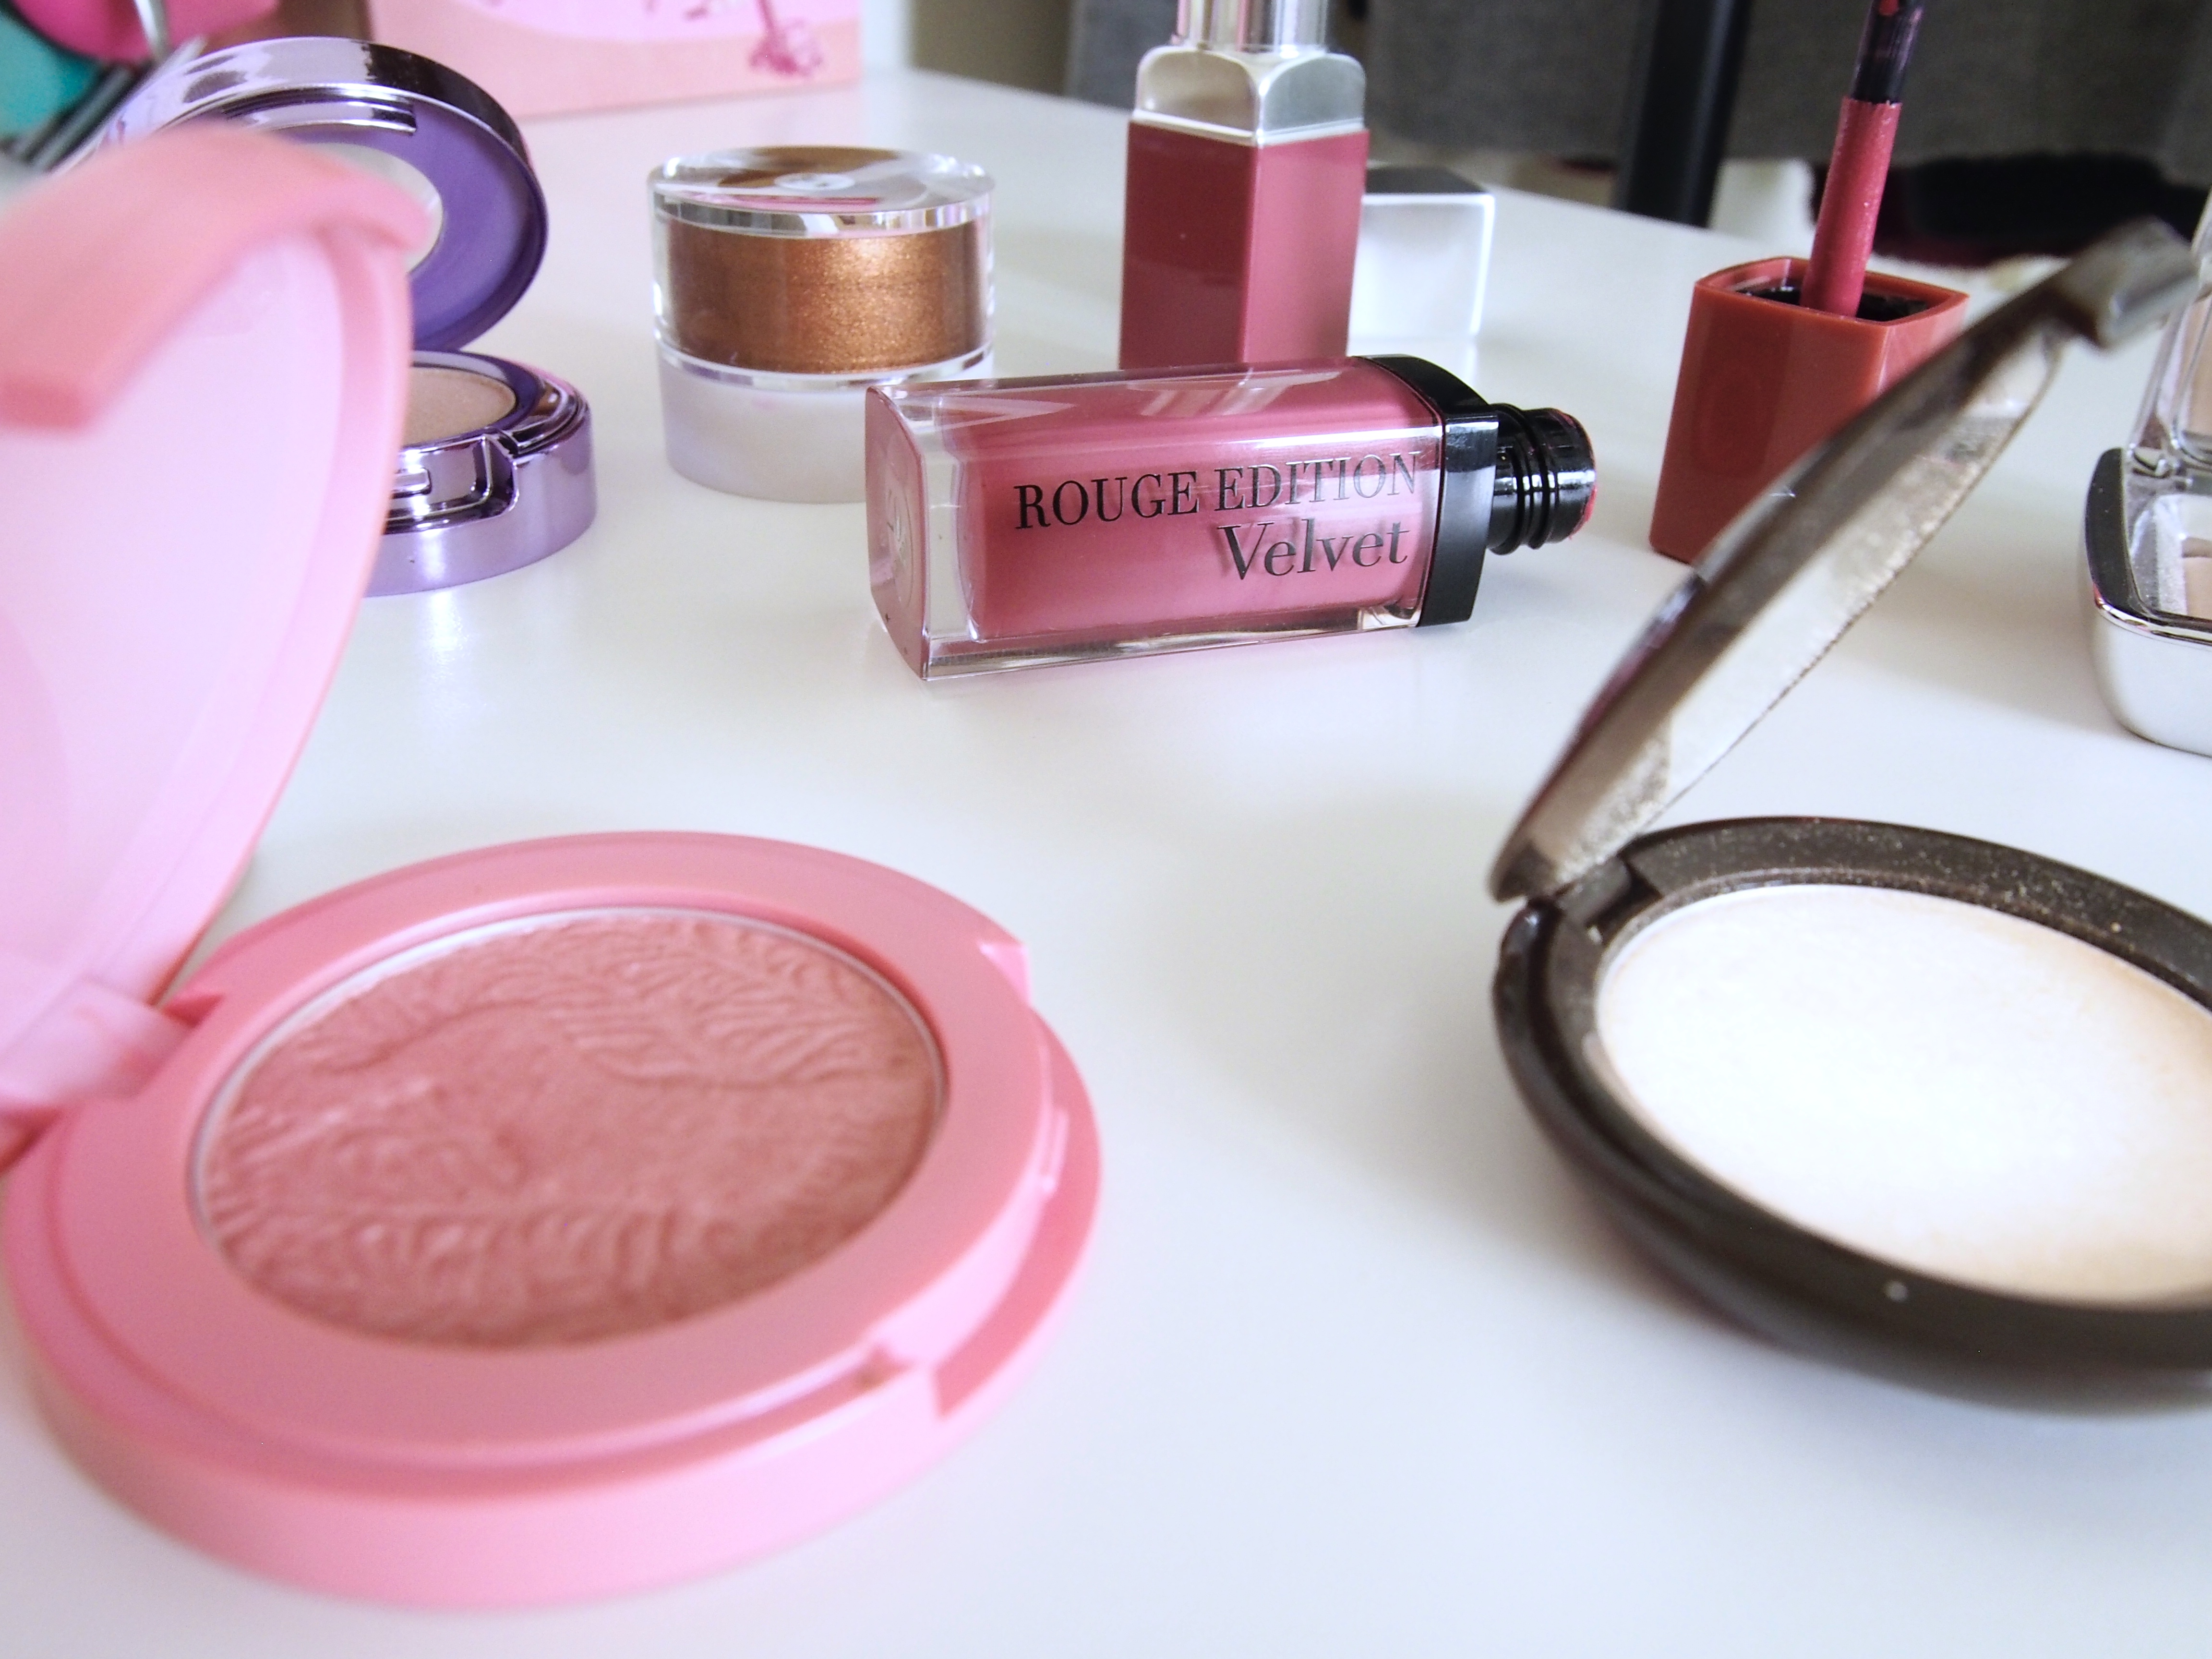 Spring Clean Your Makeup